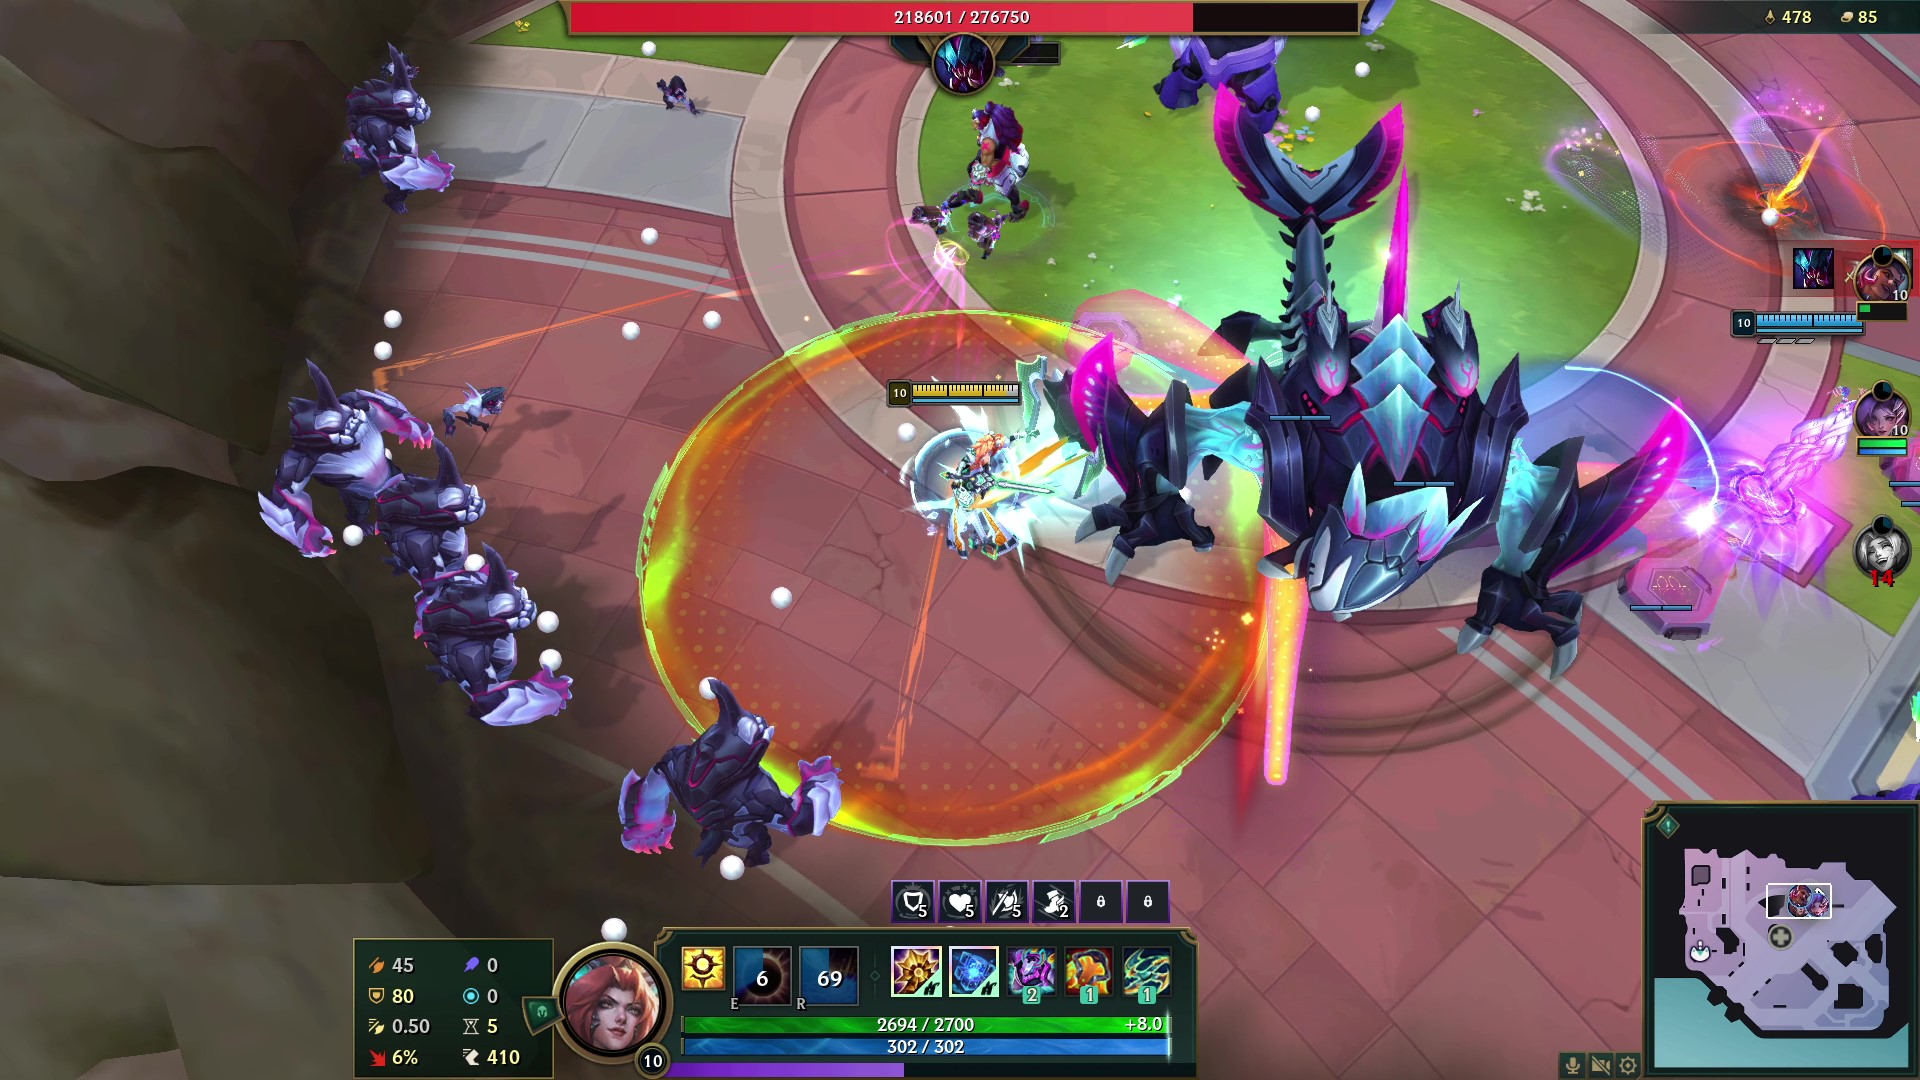 An AoE attack in League of Legends' Swarm mode.